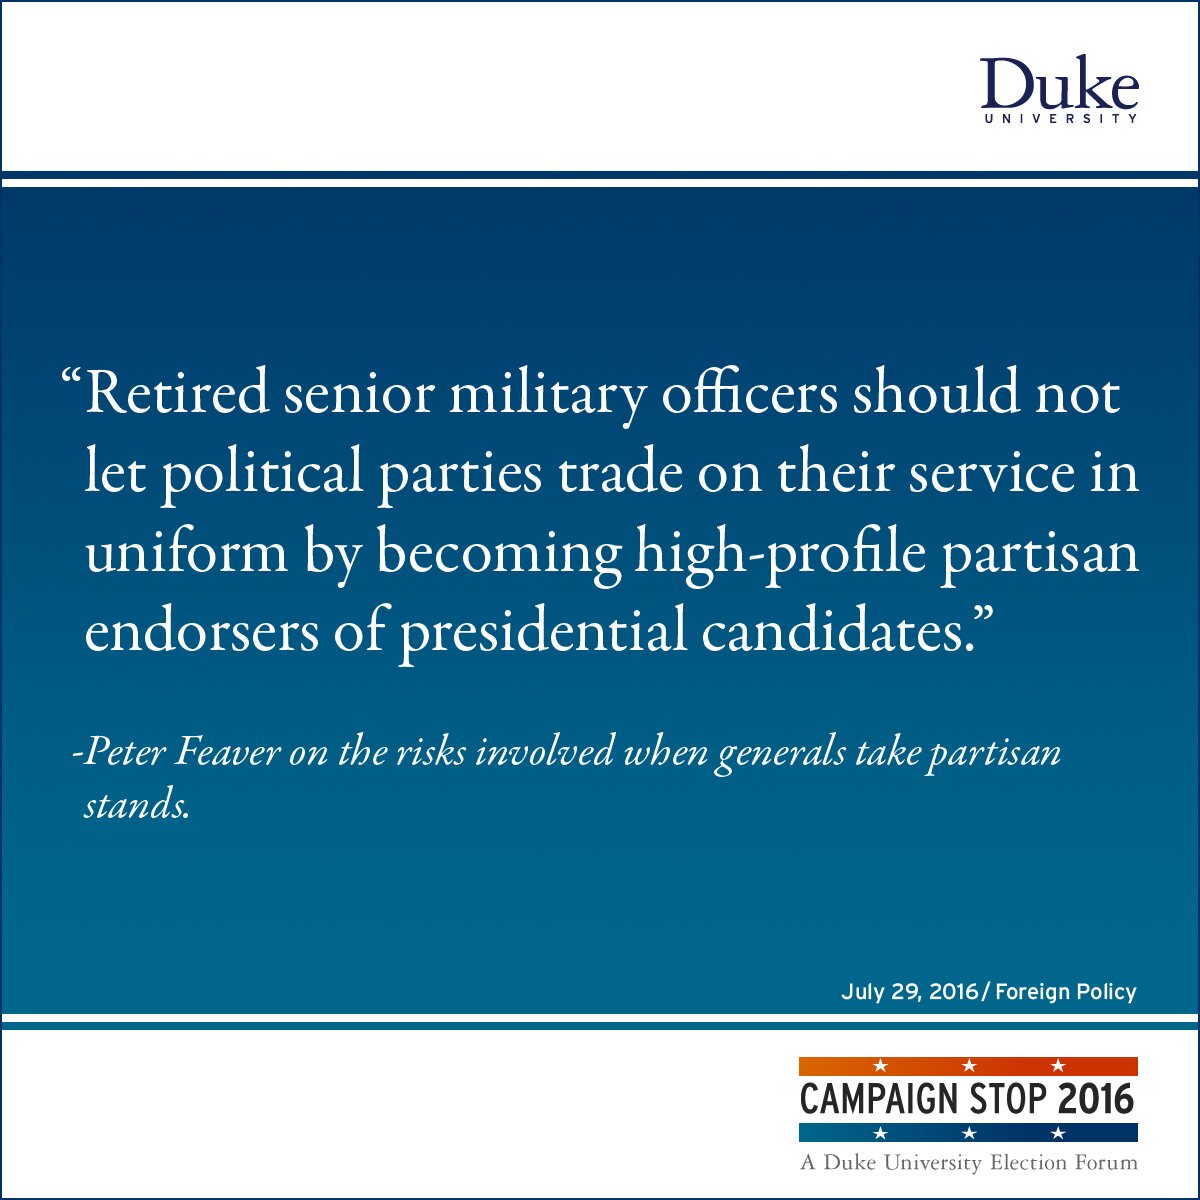 “Retired senior military officers should not let political parties trade on their service in uniform by becoming high-profile partisan endorsers of presidential candidates.” -Peter Feaver on the risks involved when generals take partisan stands.